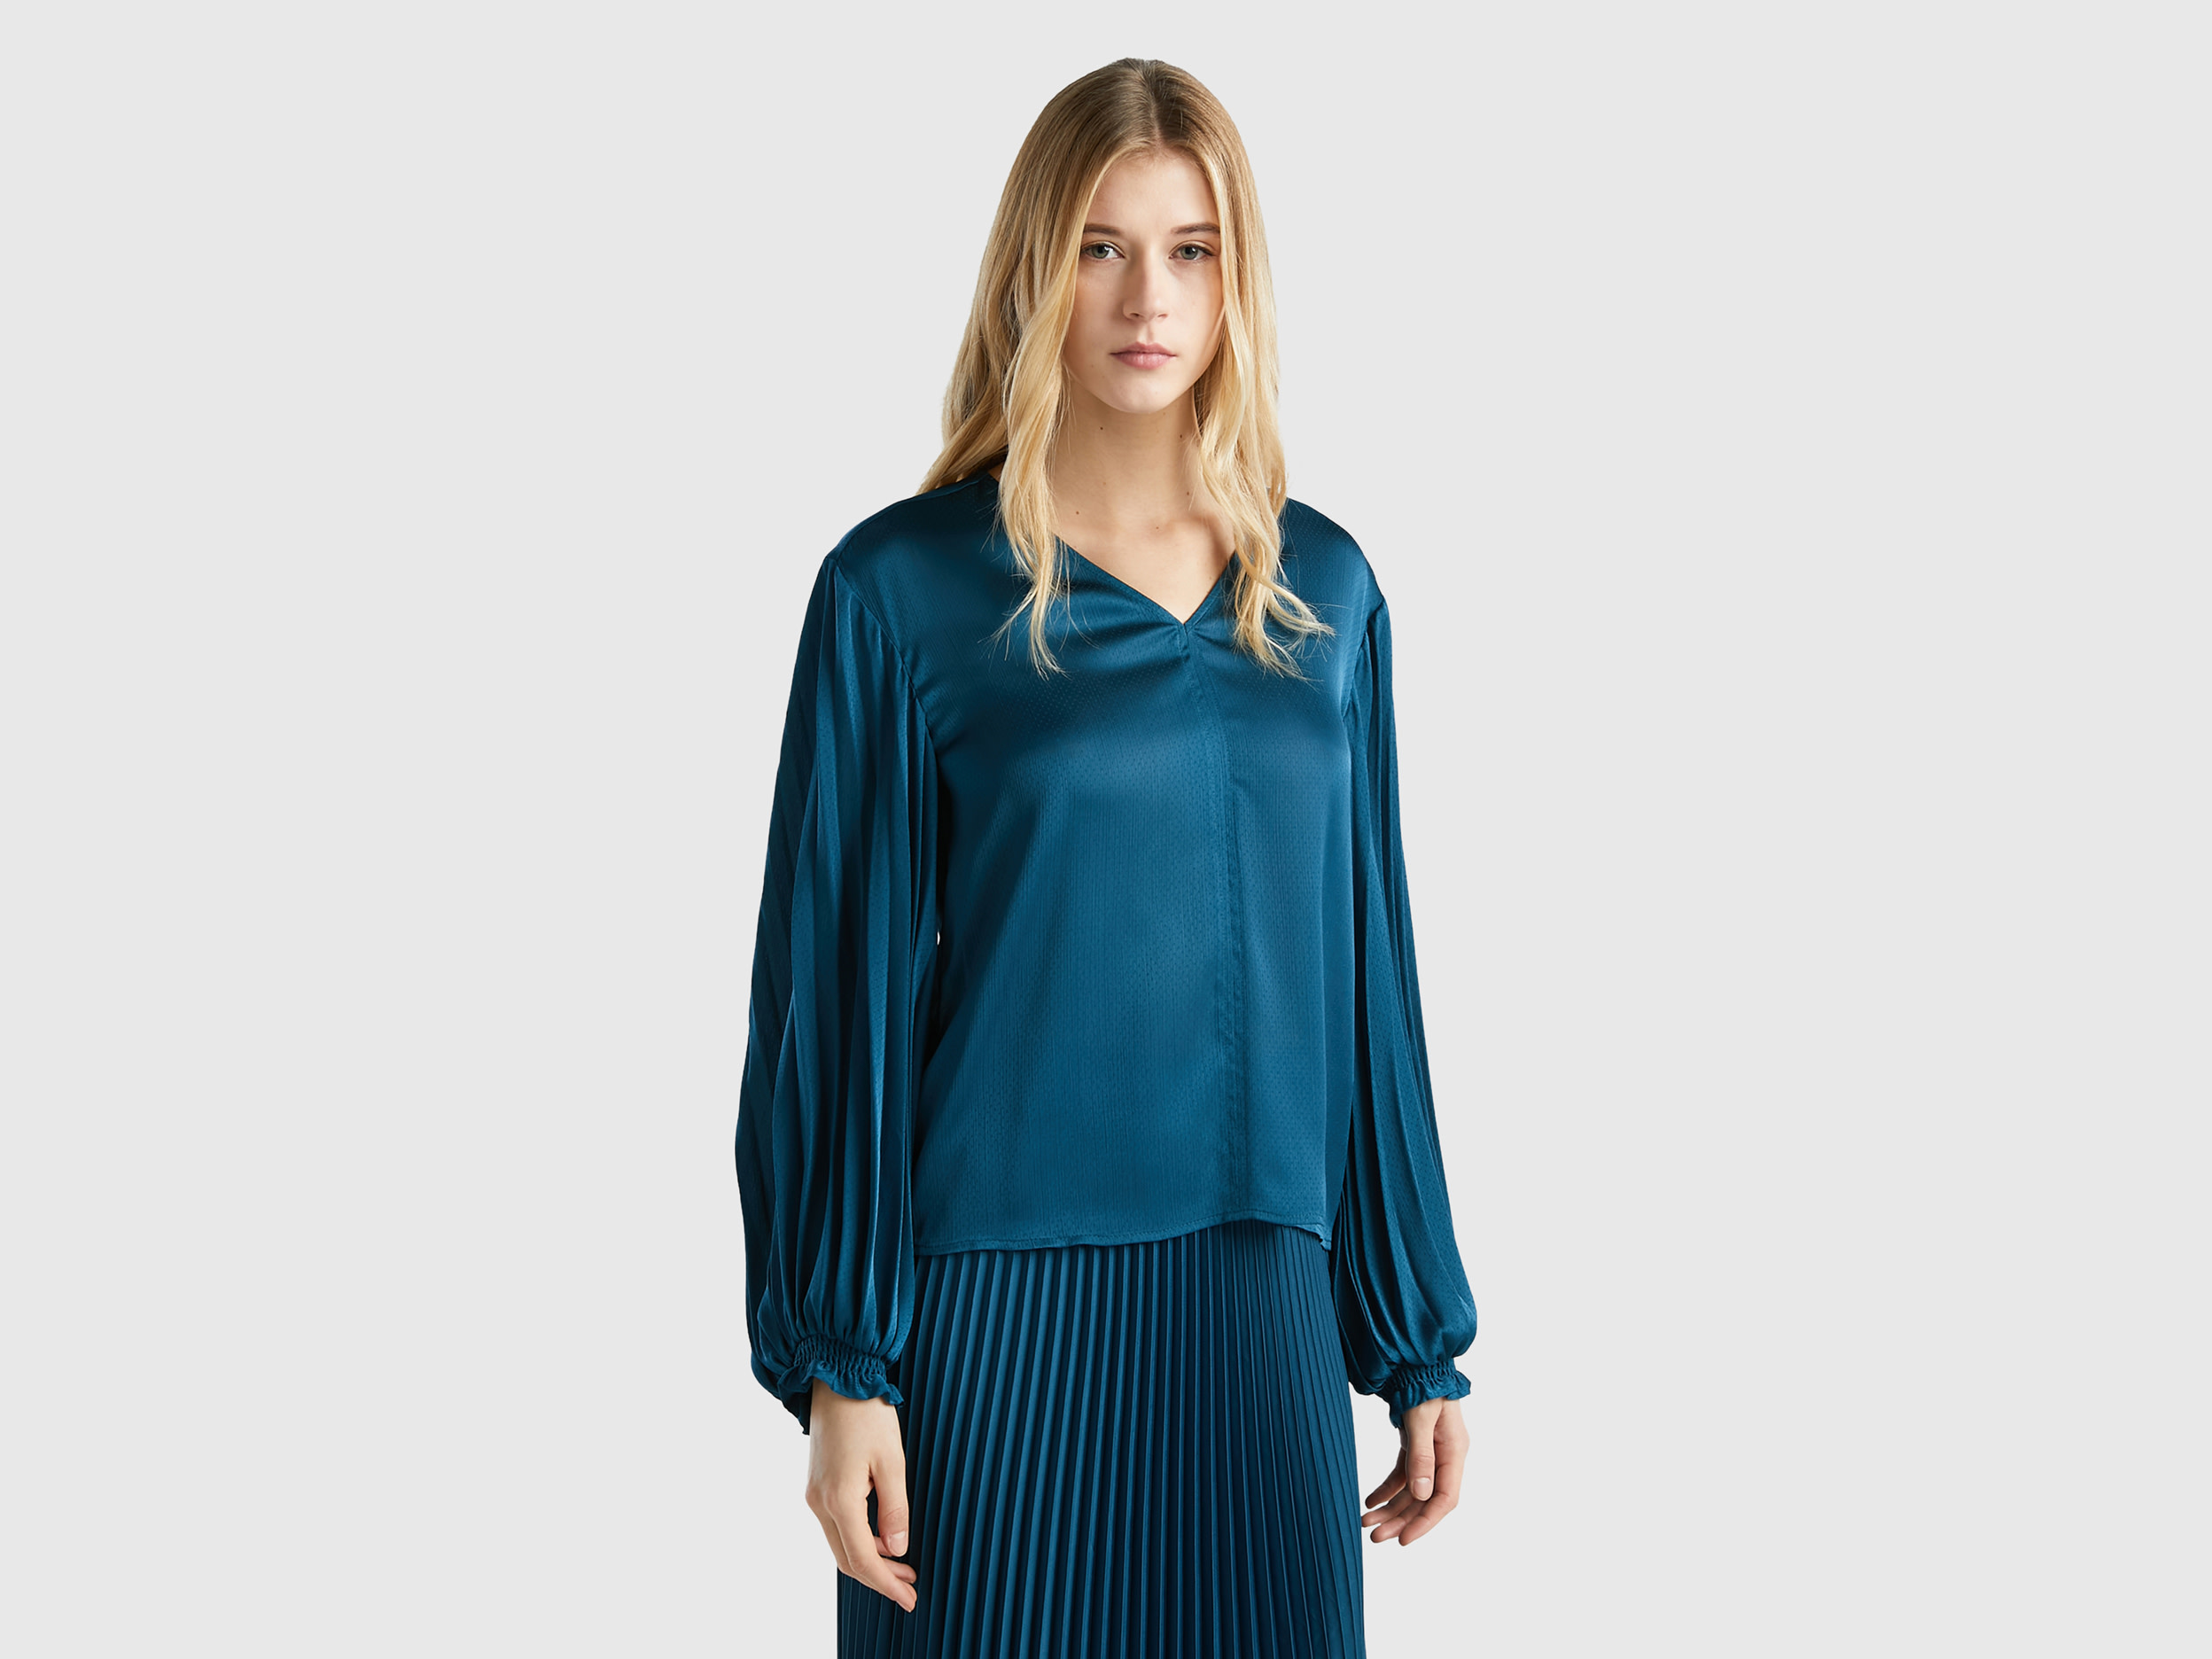 Benetton, Blouse With Long Pleated Sleeves, size XS, Teal, Women